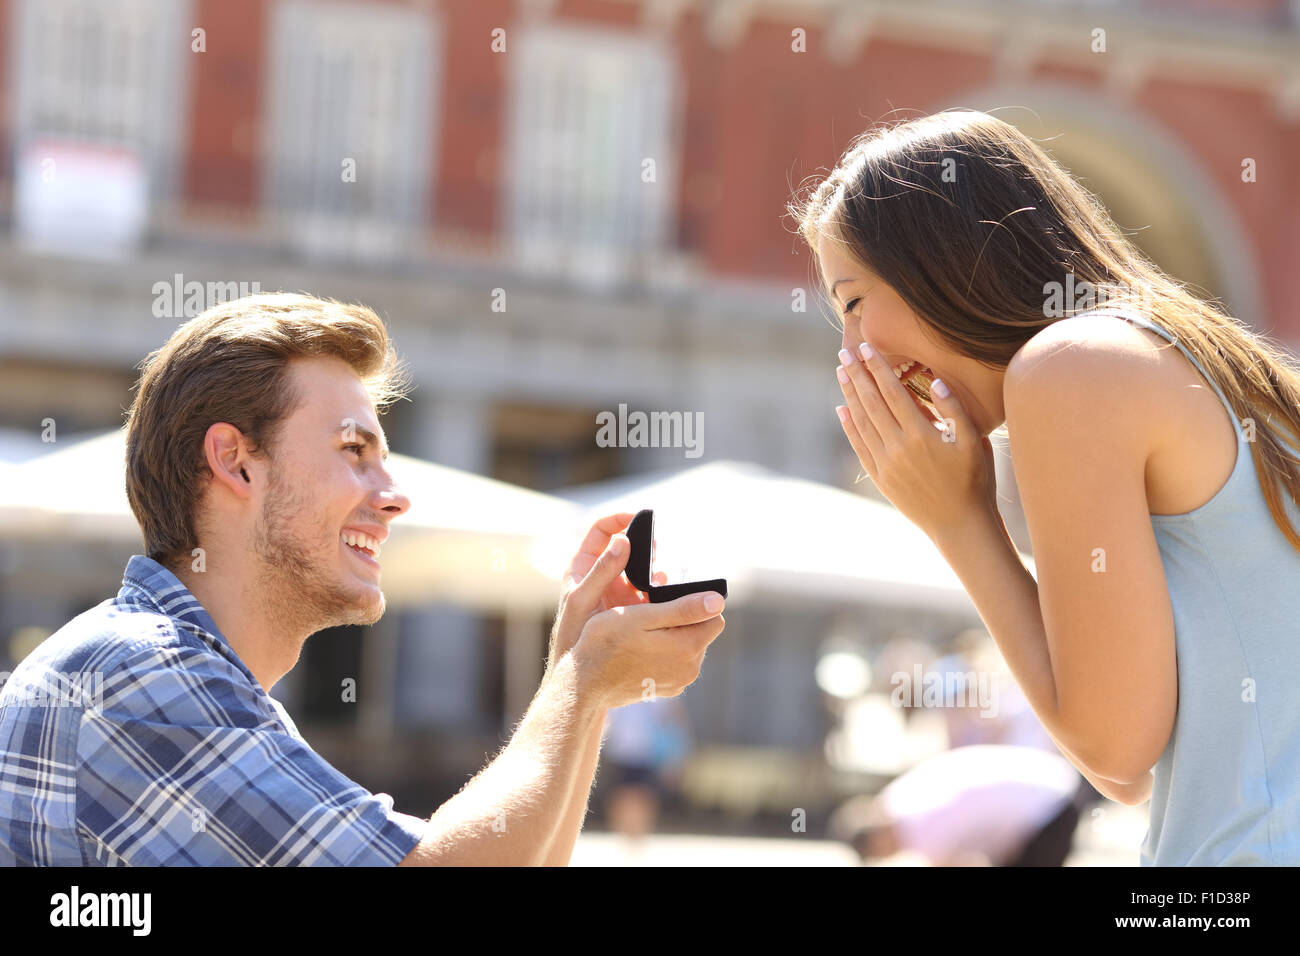 Proposal in the street with a man asking marry to his happy girlfriend Stock Photo